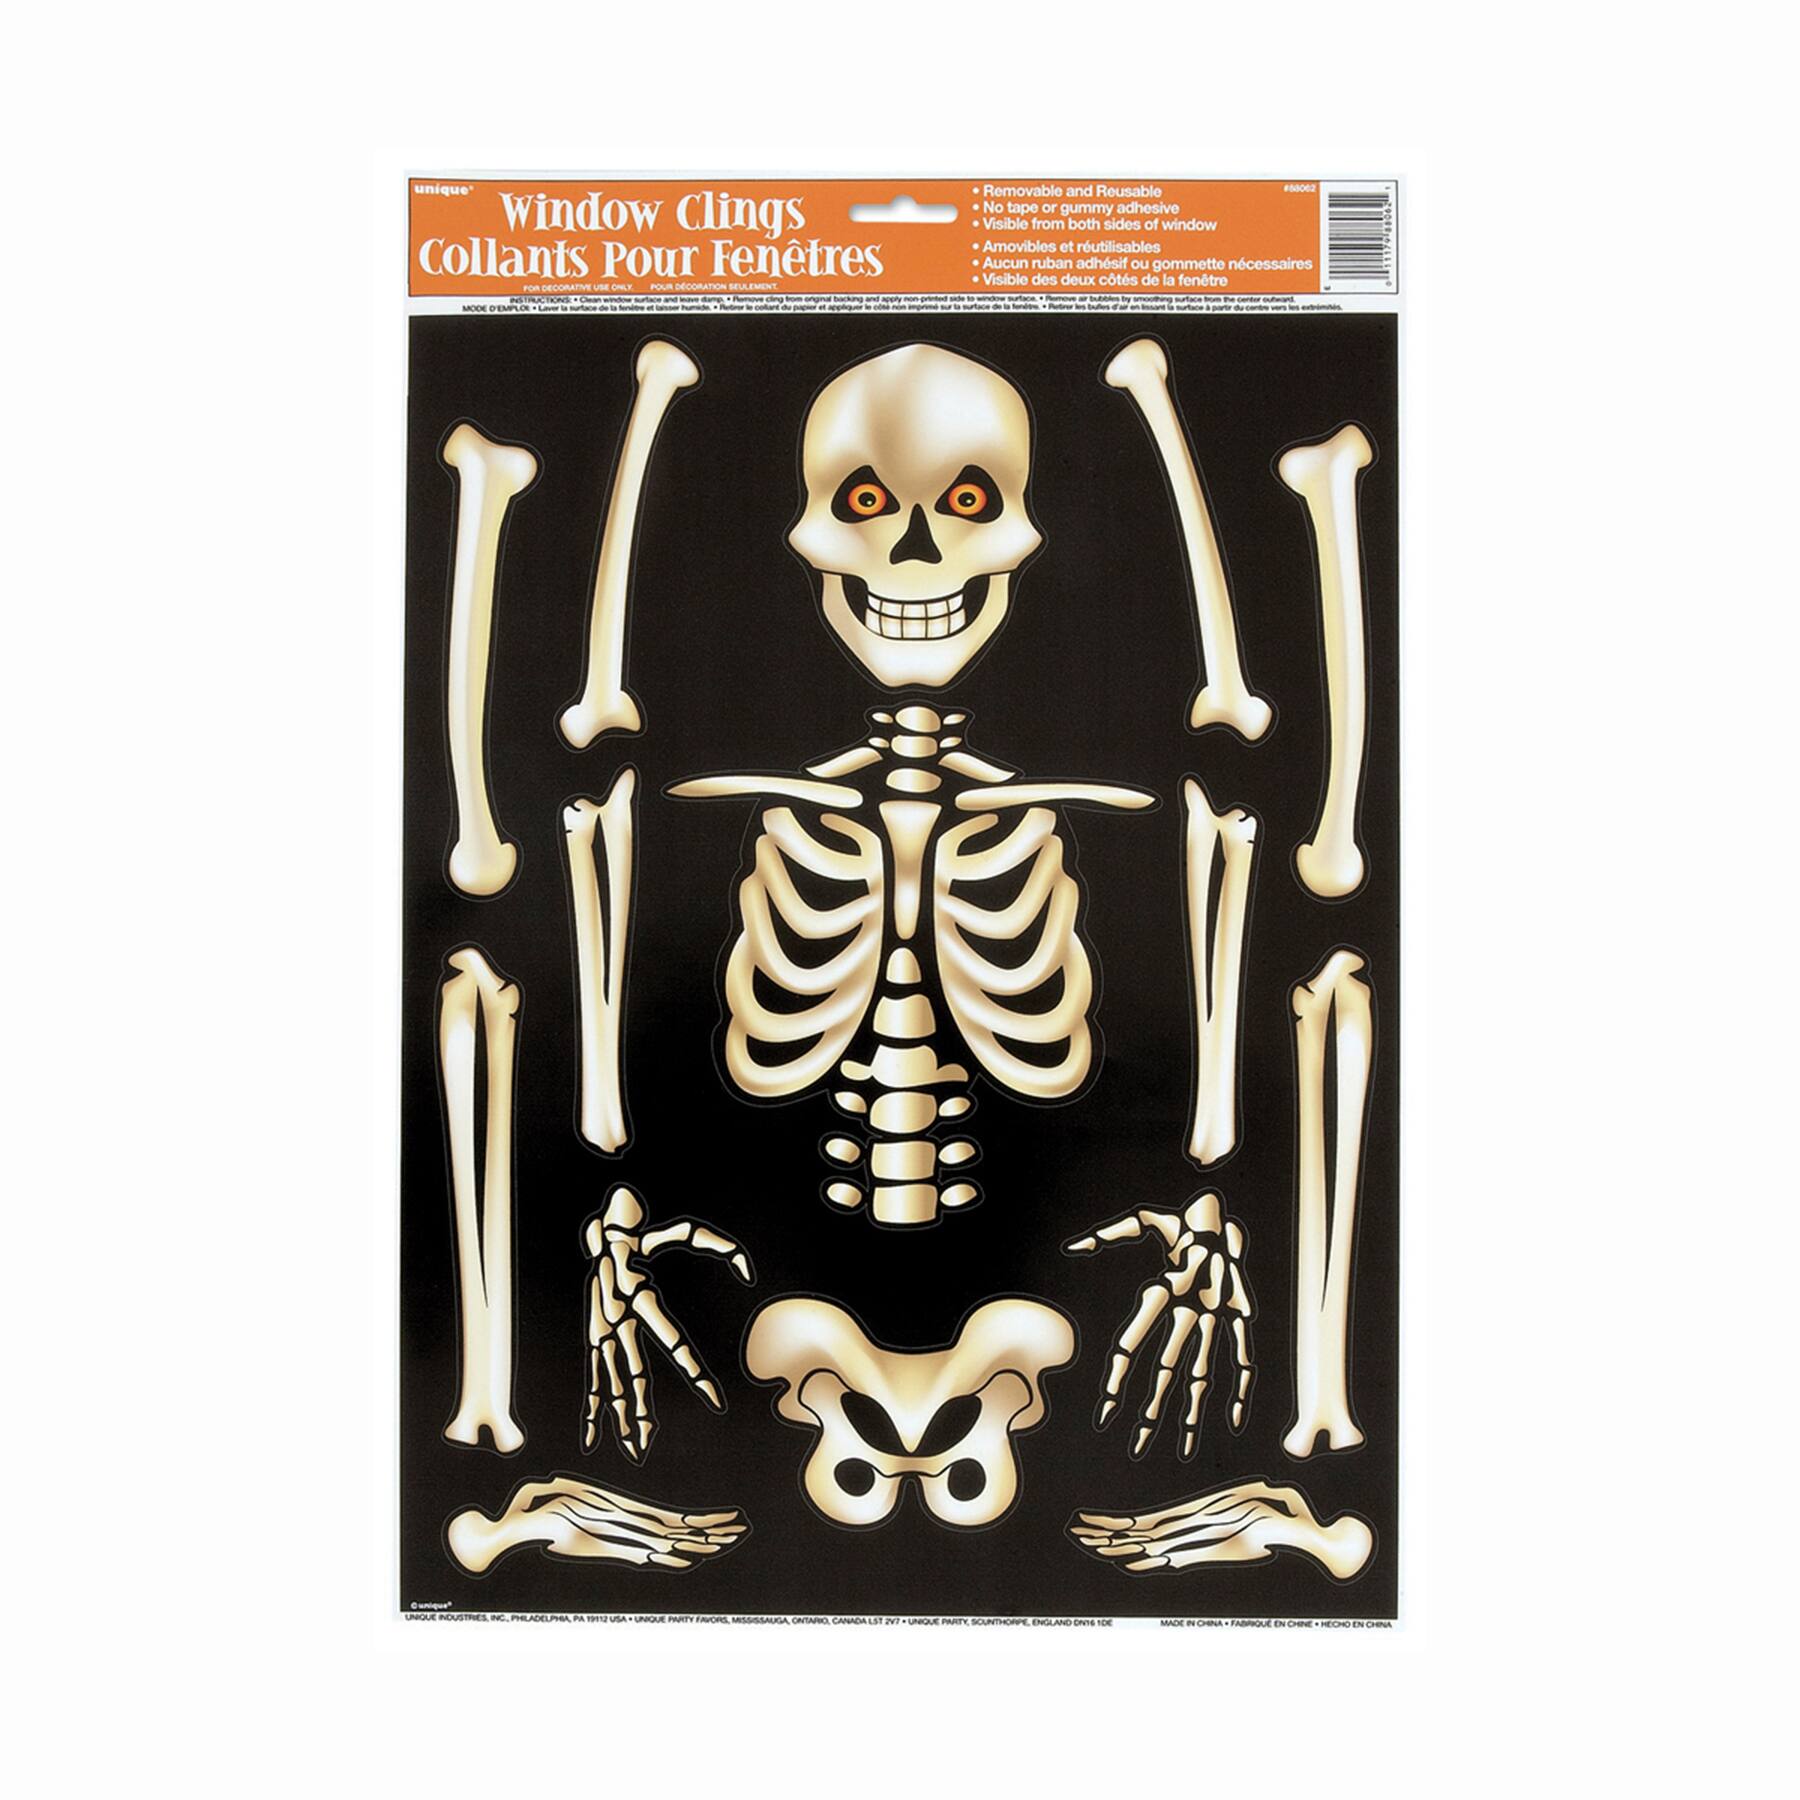 Skeleton Unique Window Clings Great for Halloween. Removable and Reusable 